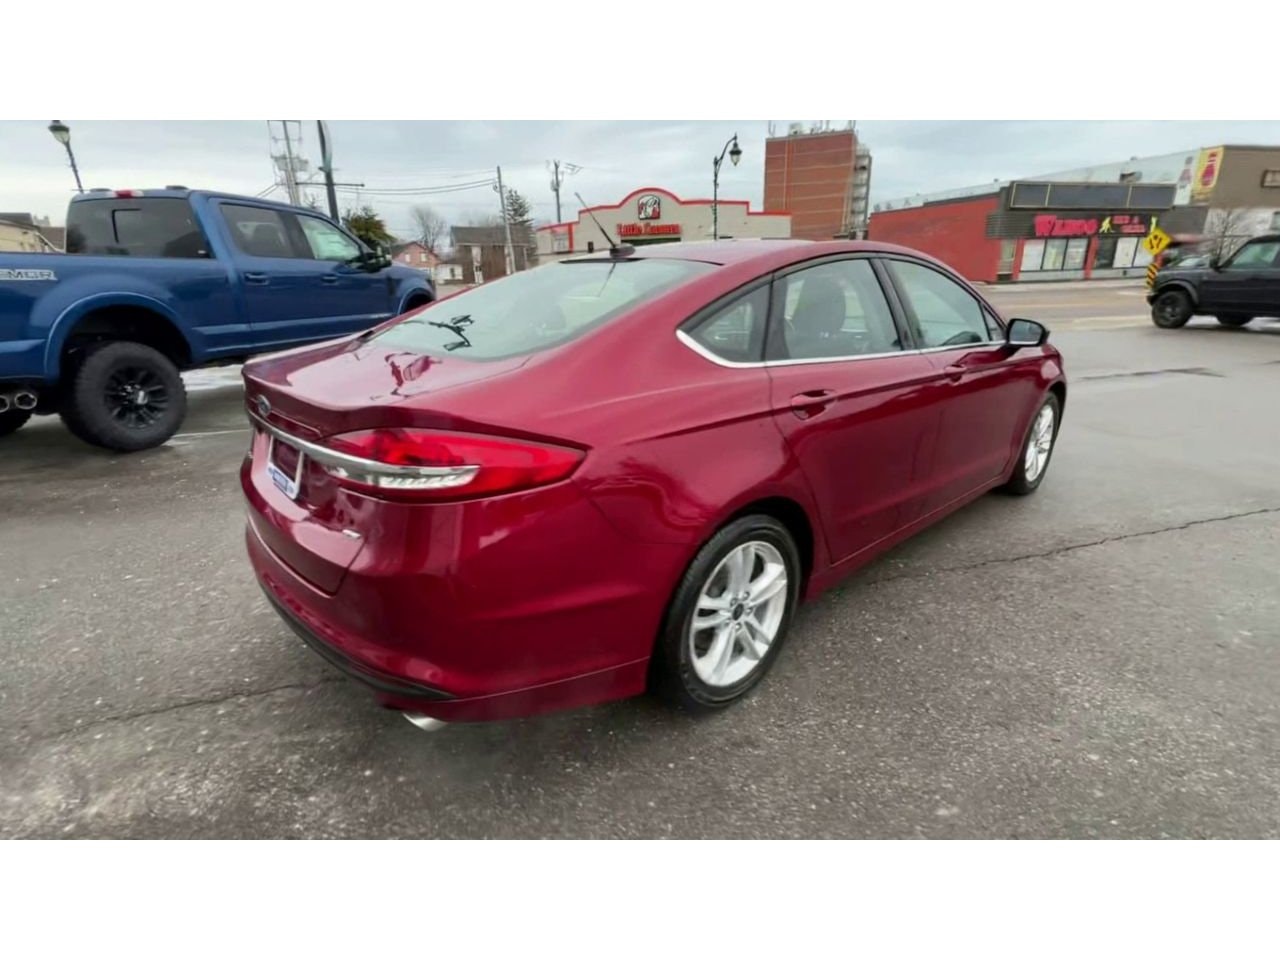 2018 Ford Fusion - P20810 Full Image 8